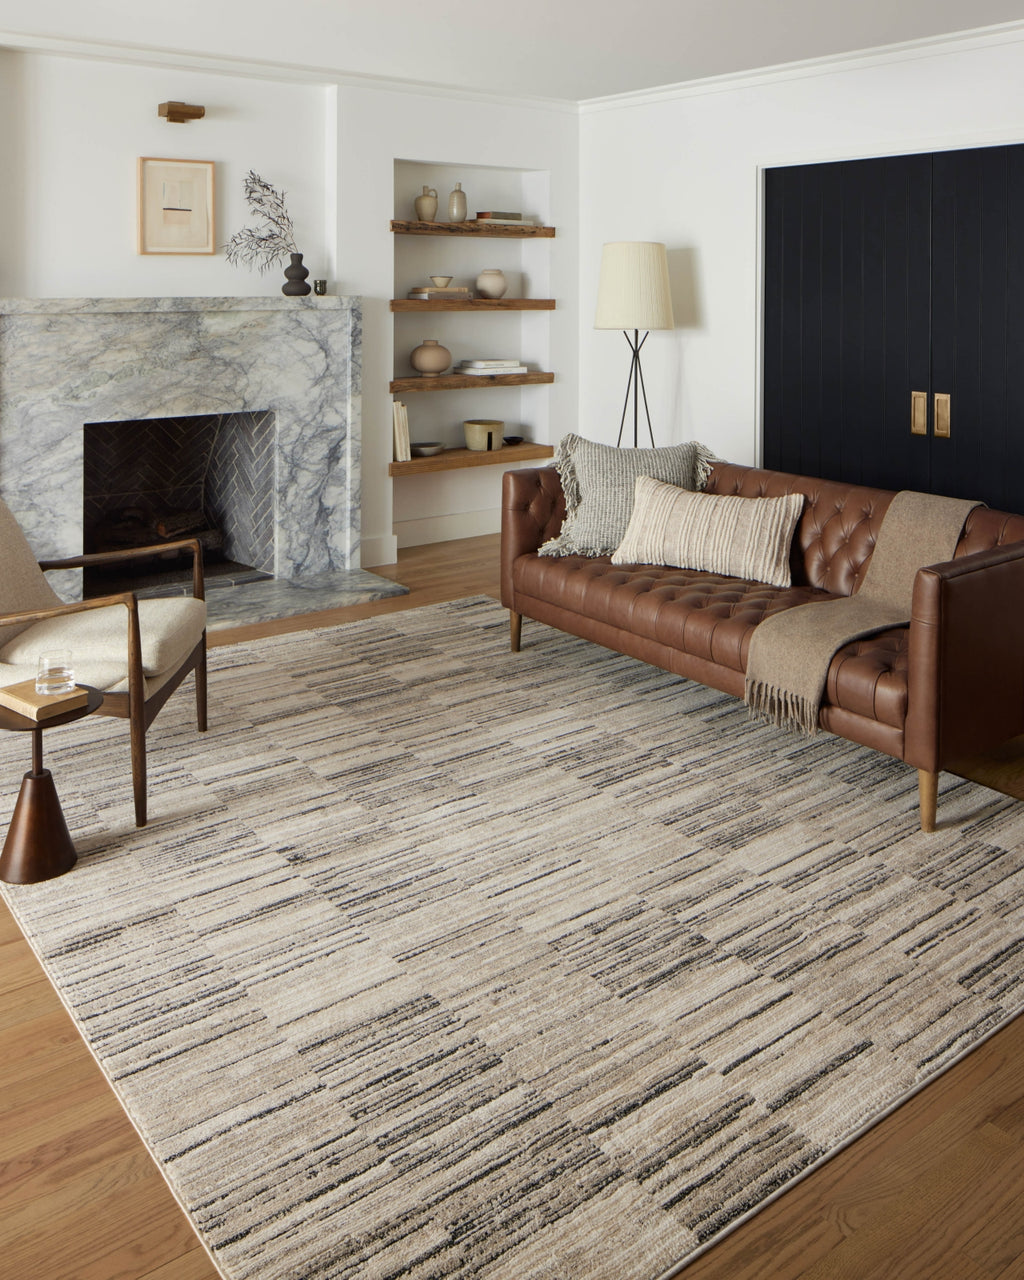 Loloi II Darby DAR-01 Charcoal/Sand Area Rug Lifestyle Image Feature